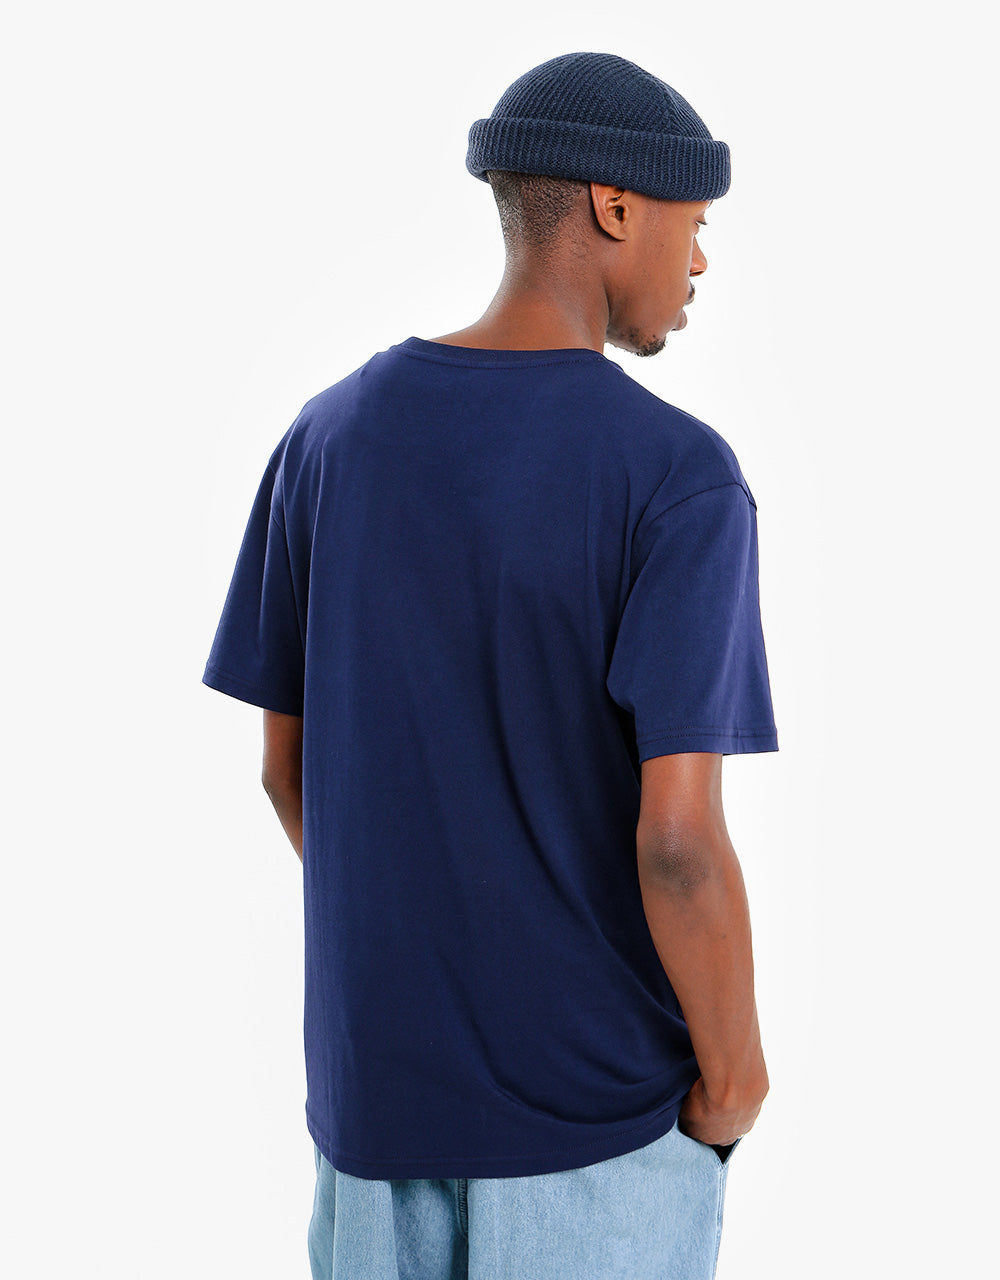 Route One Organic T-Shirt - Navy